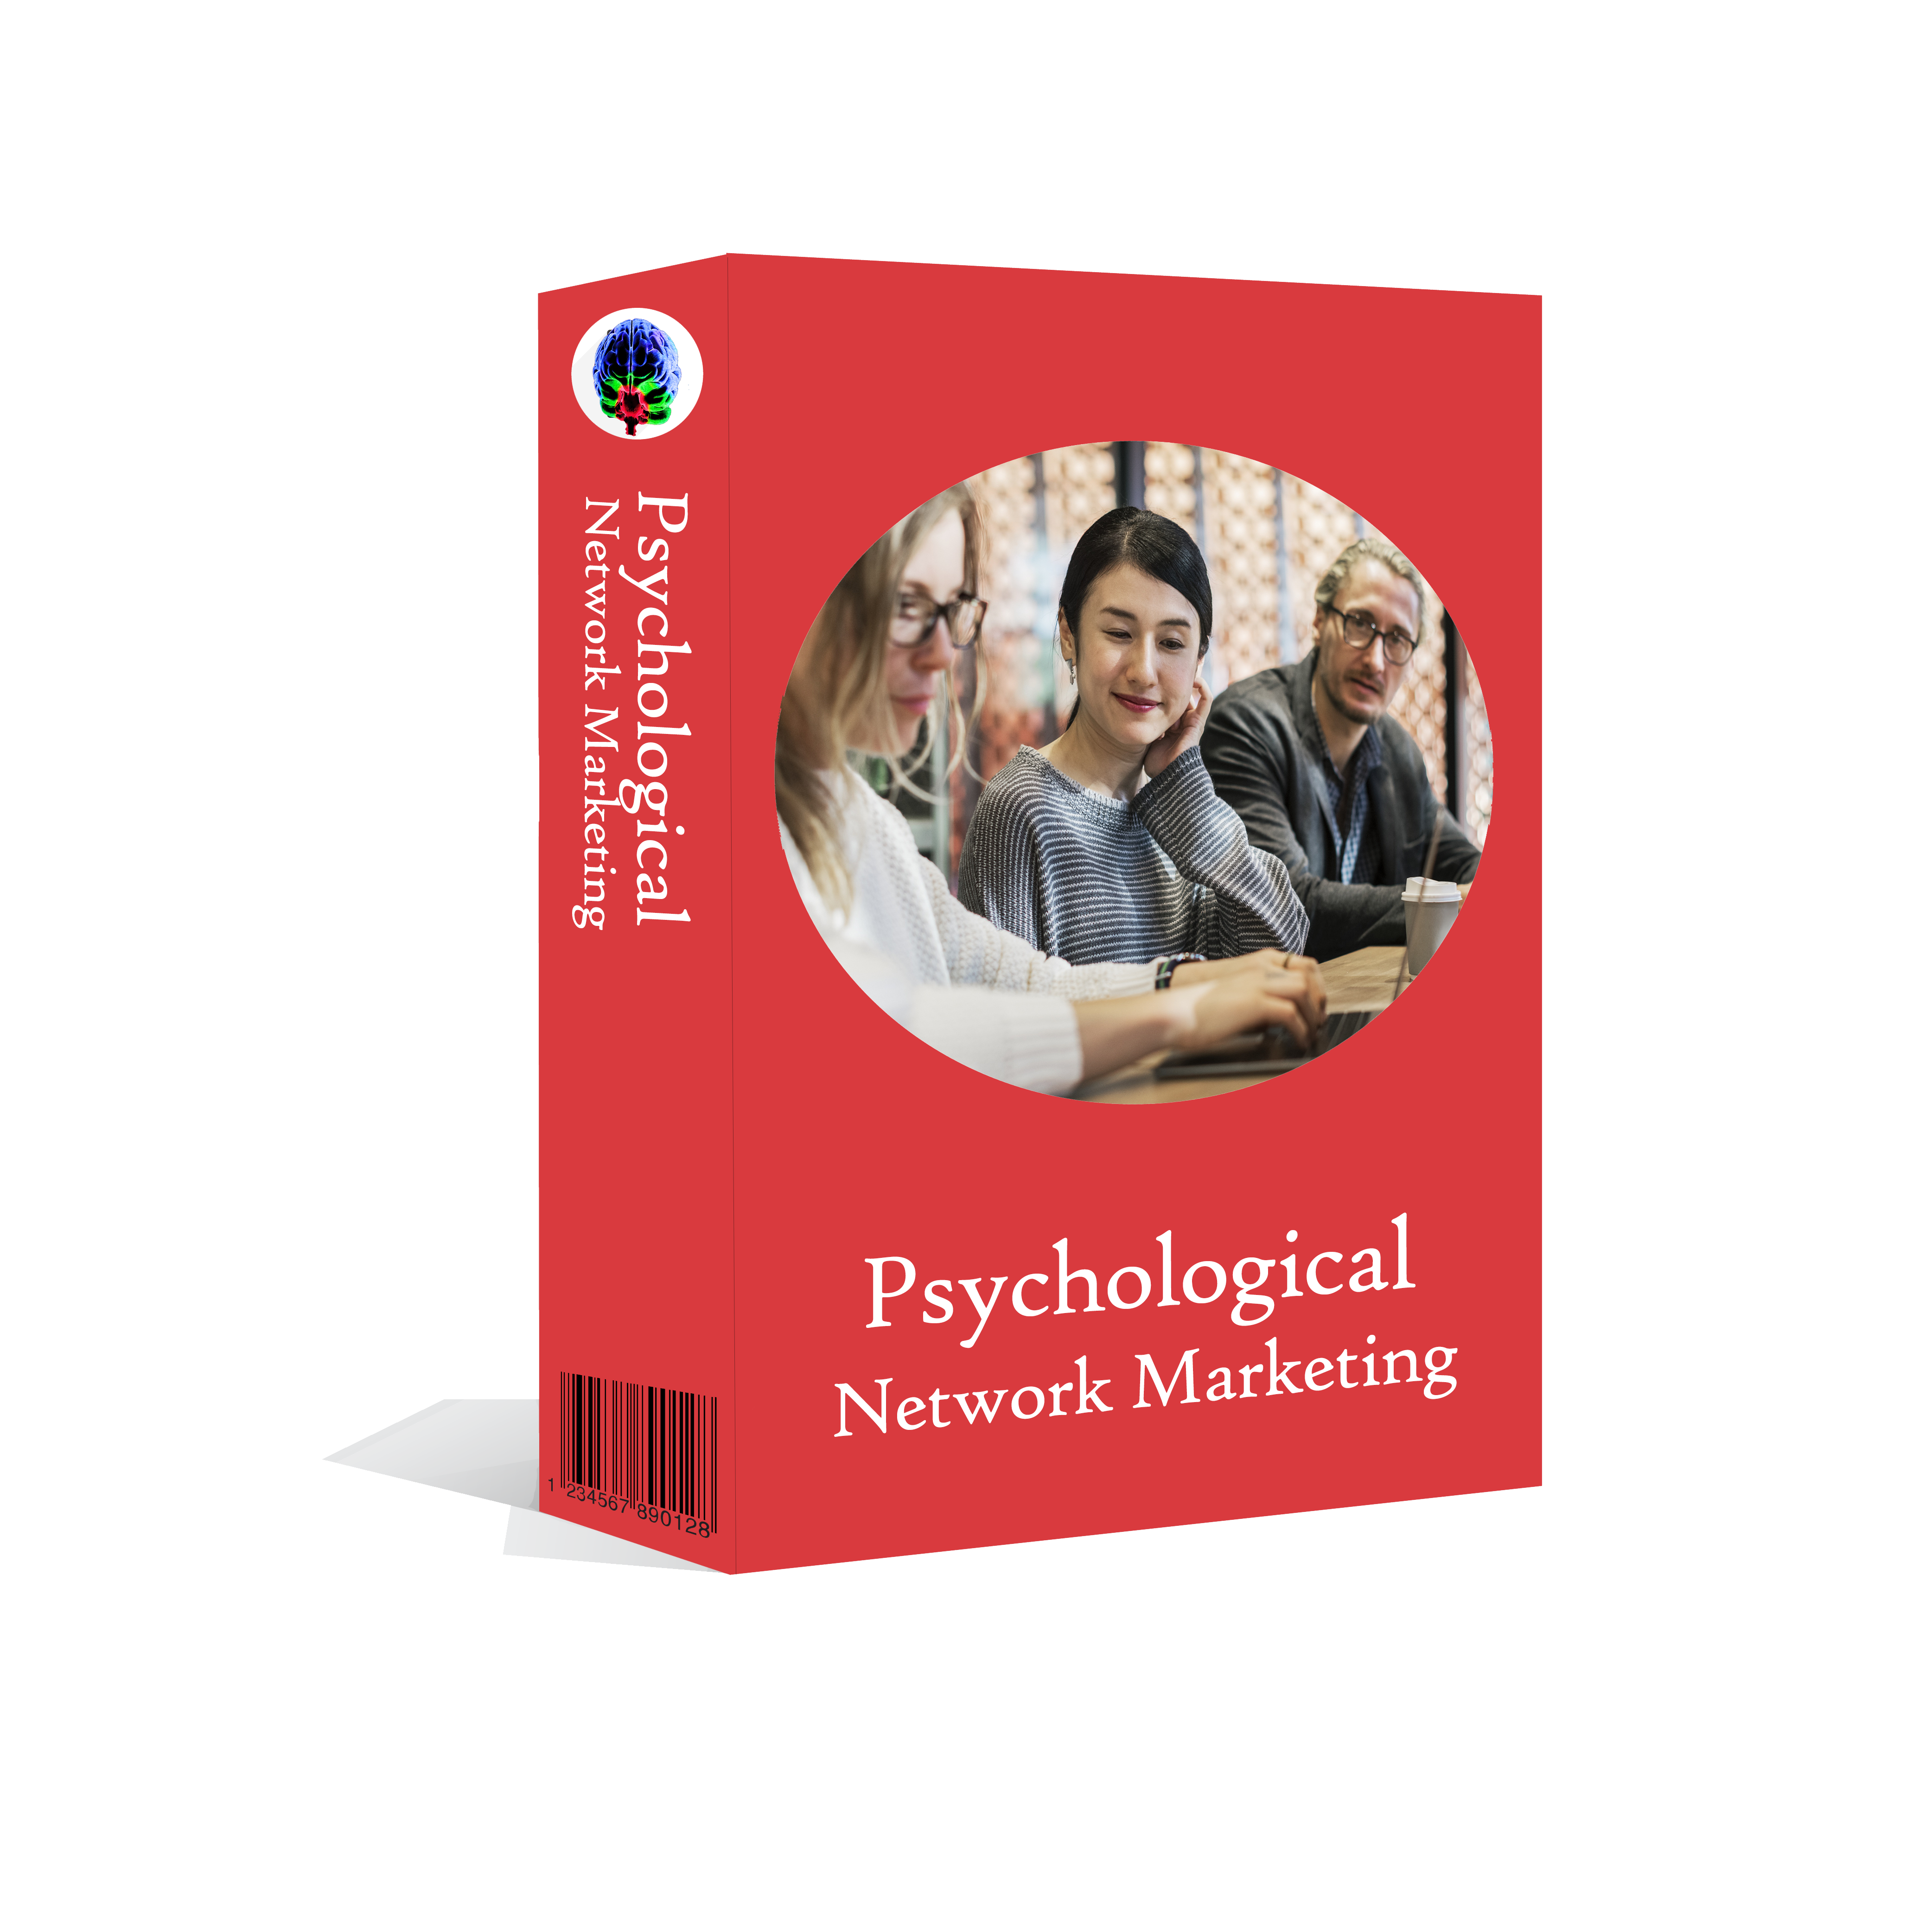 Psychological Network Marketing Course